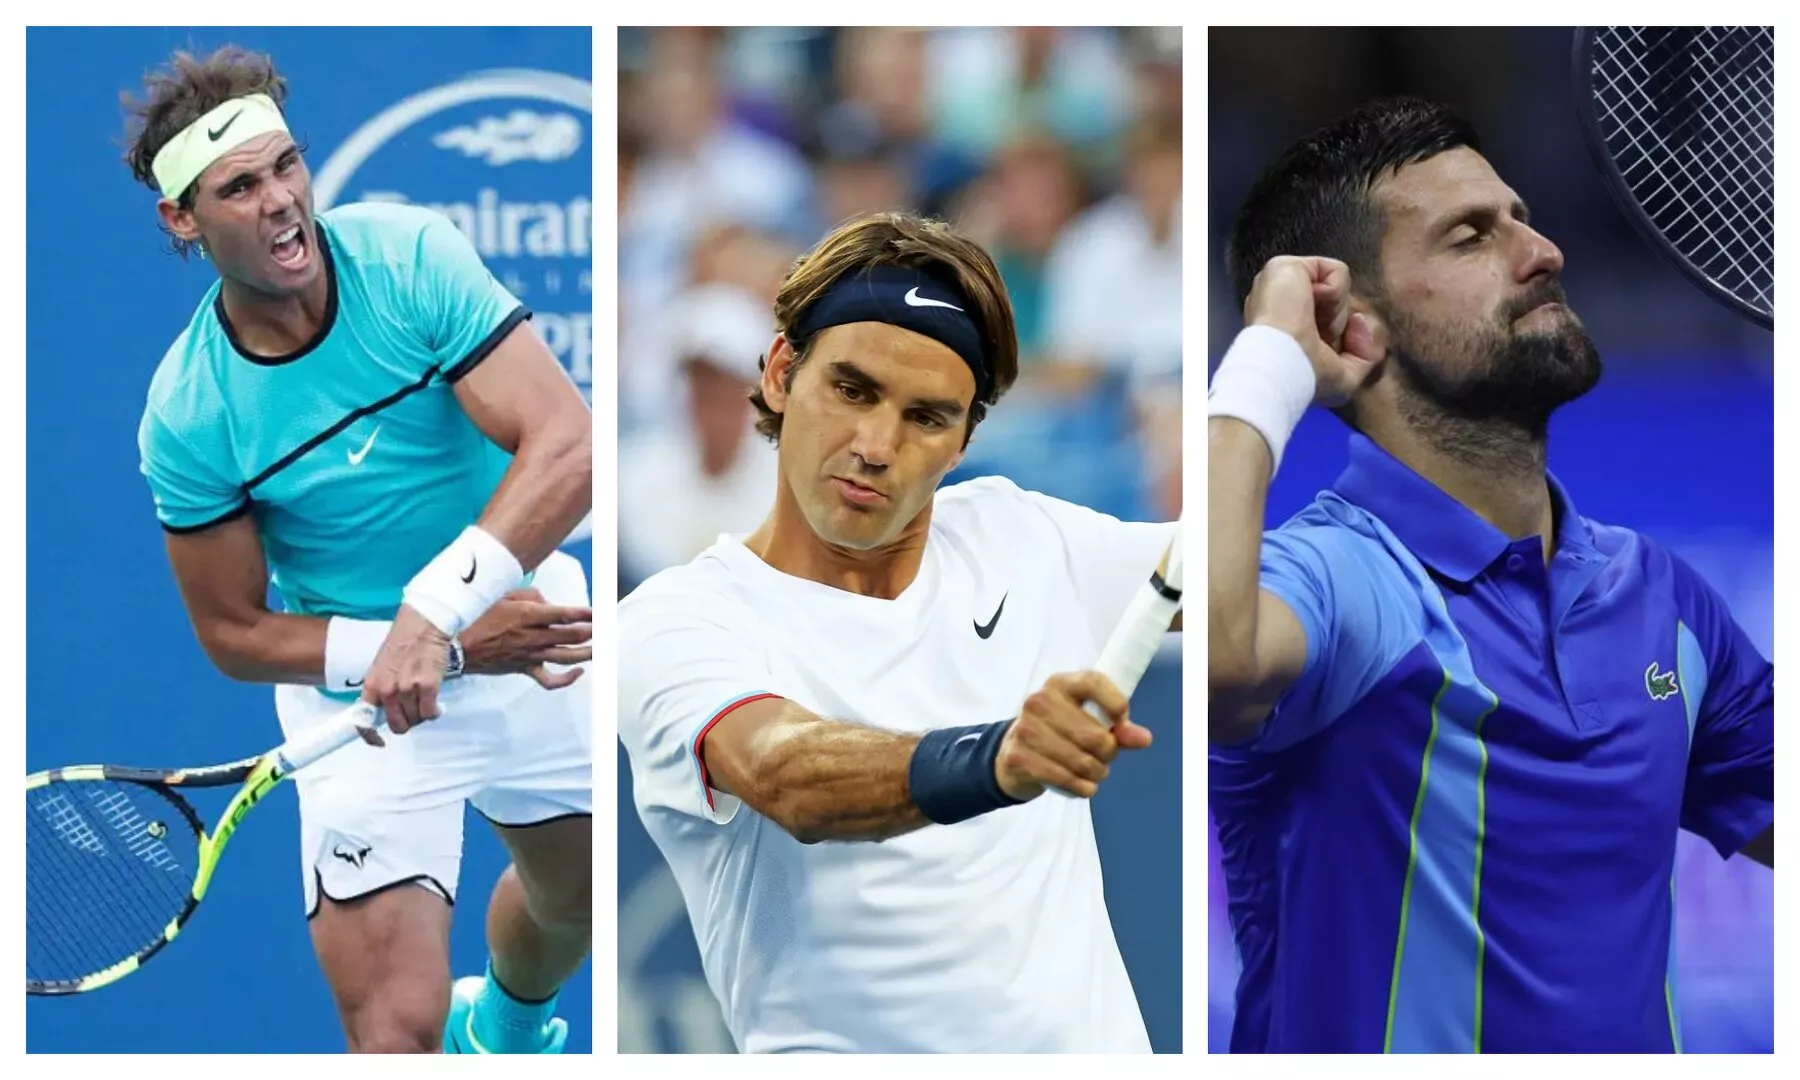 Grand Slams Top 10 men’s singles players with most match wins